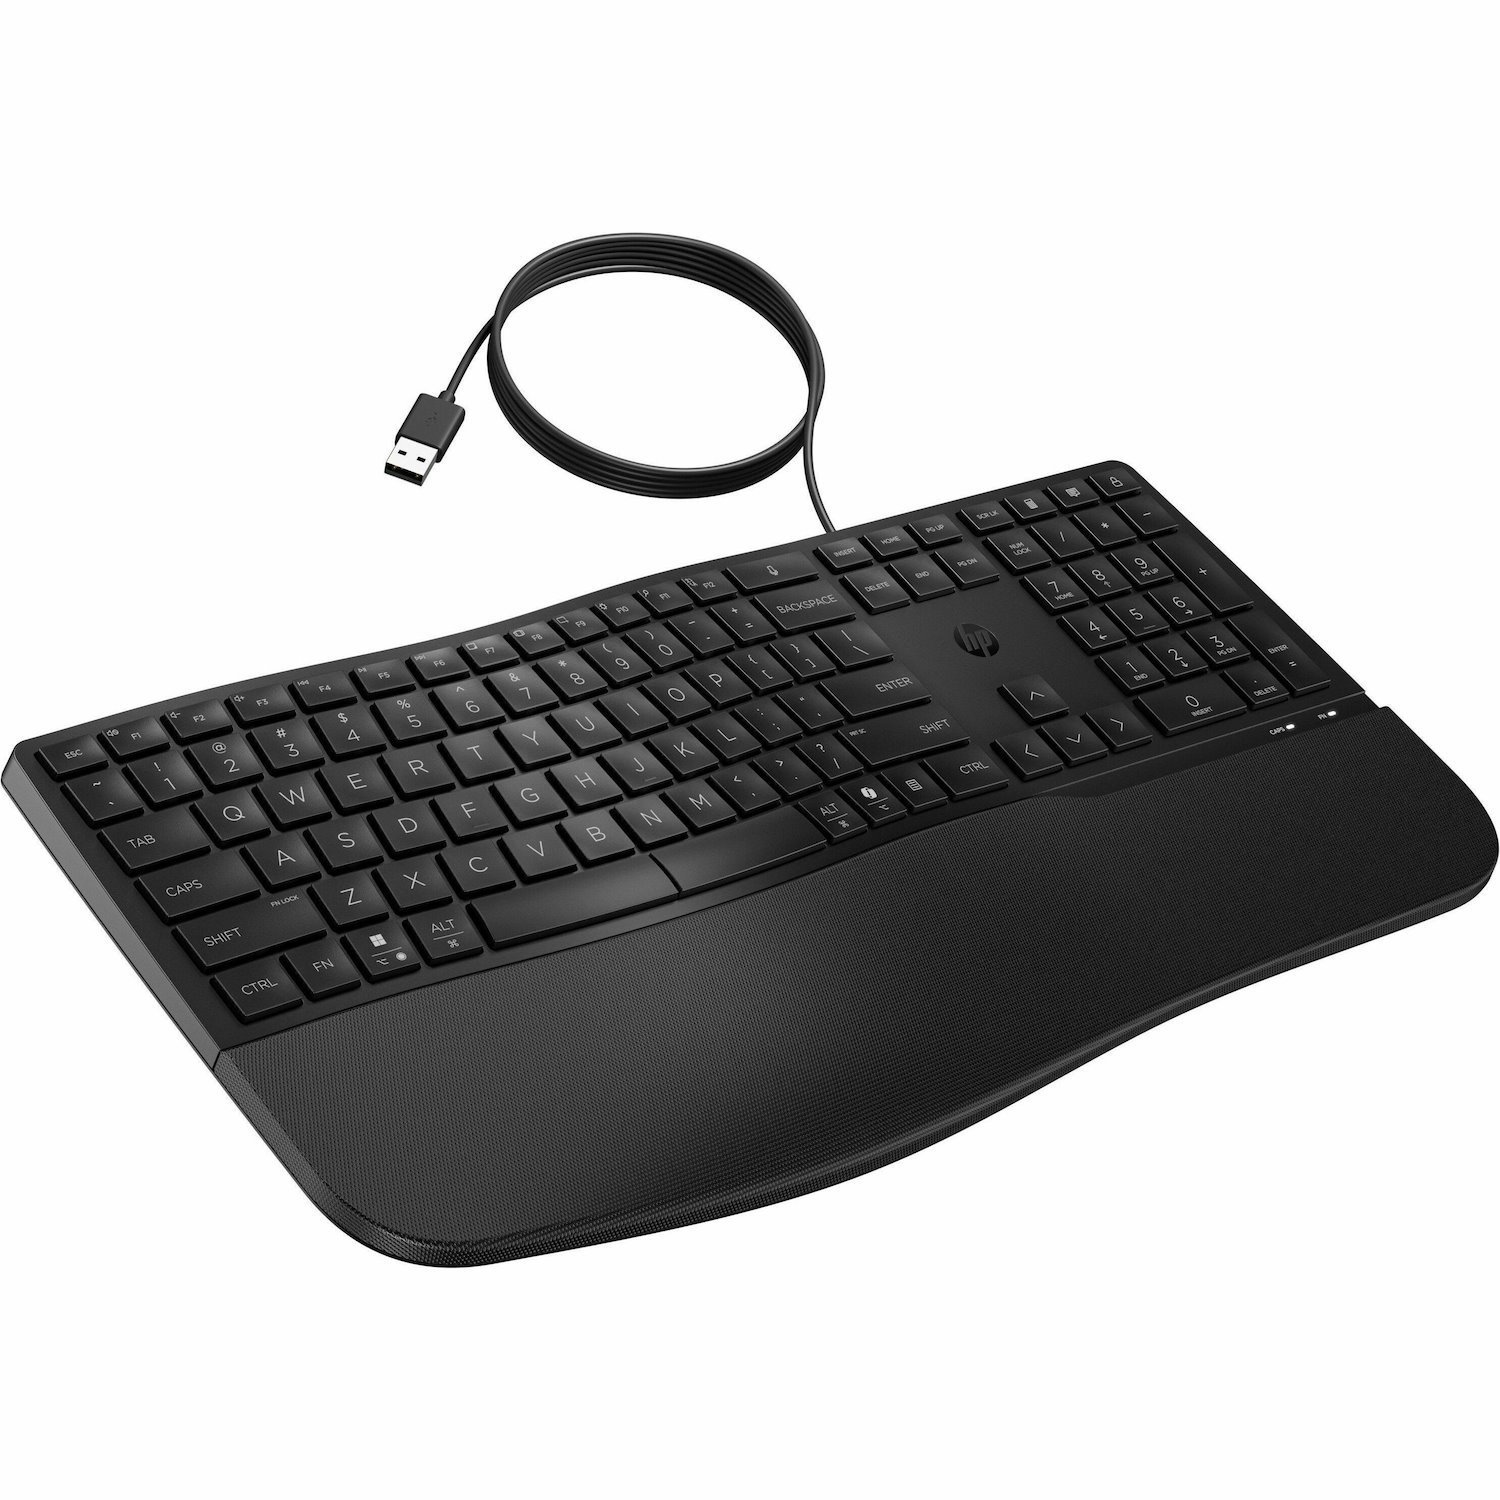 HP 485 Keyboard - Cable Connectivity - USB Type A Interface - Black